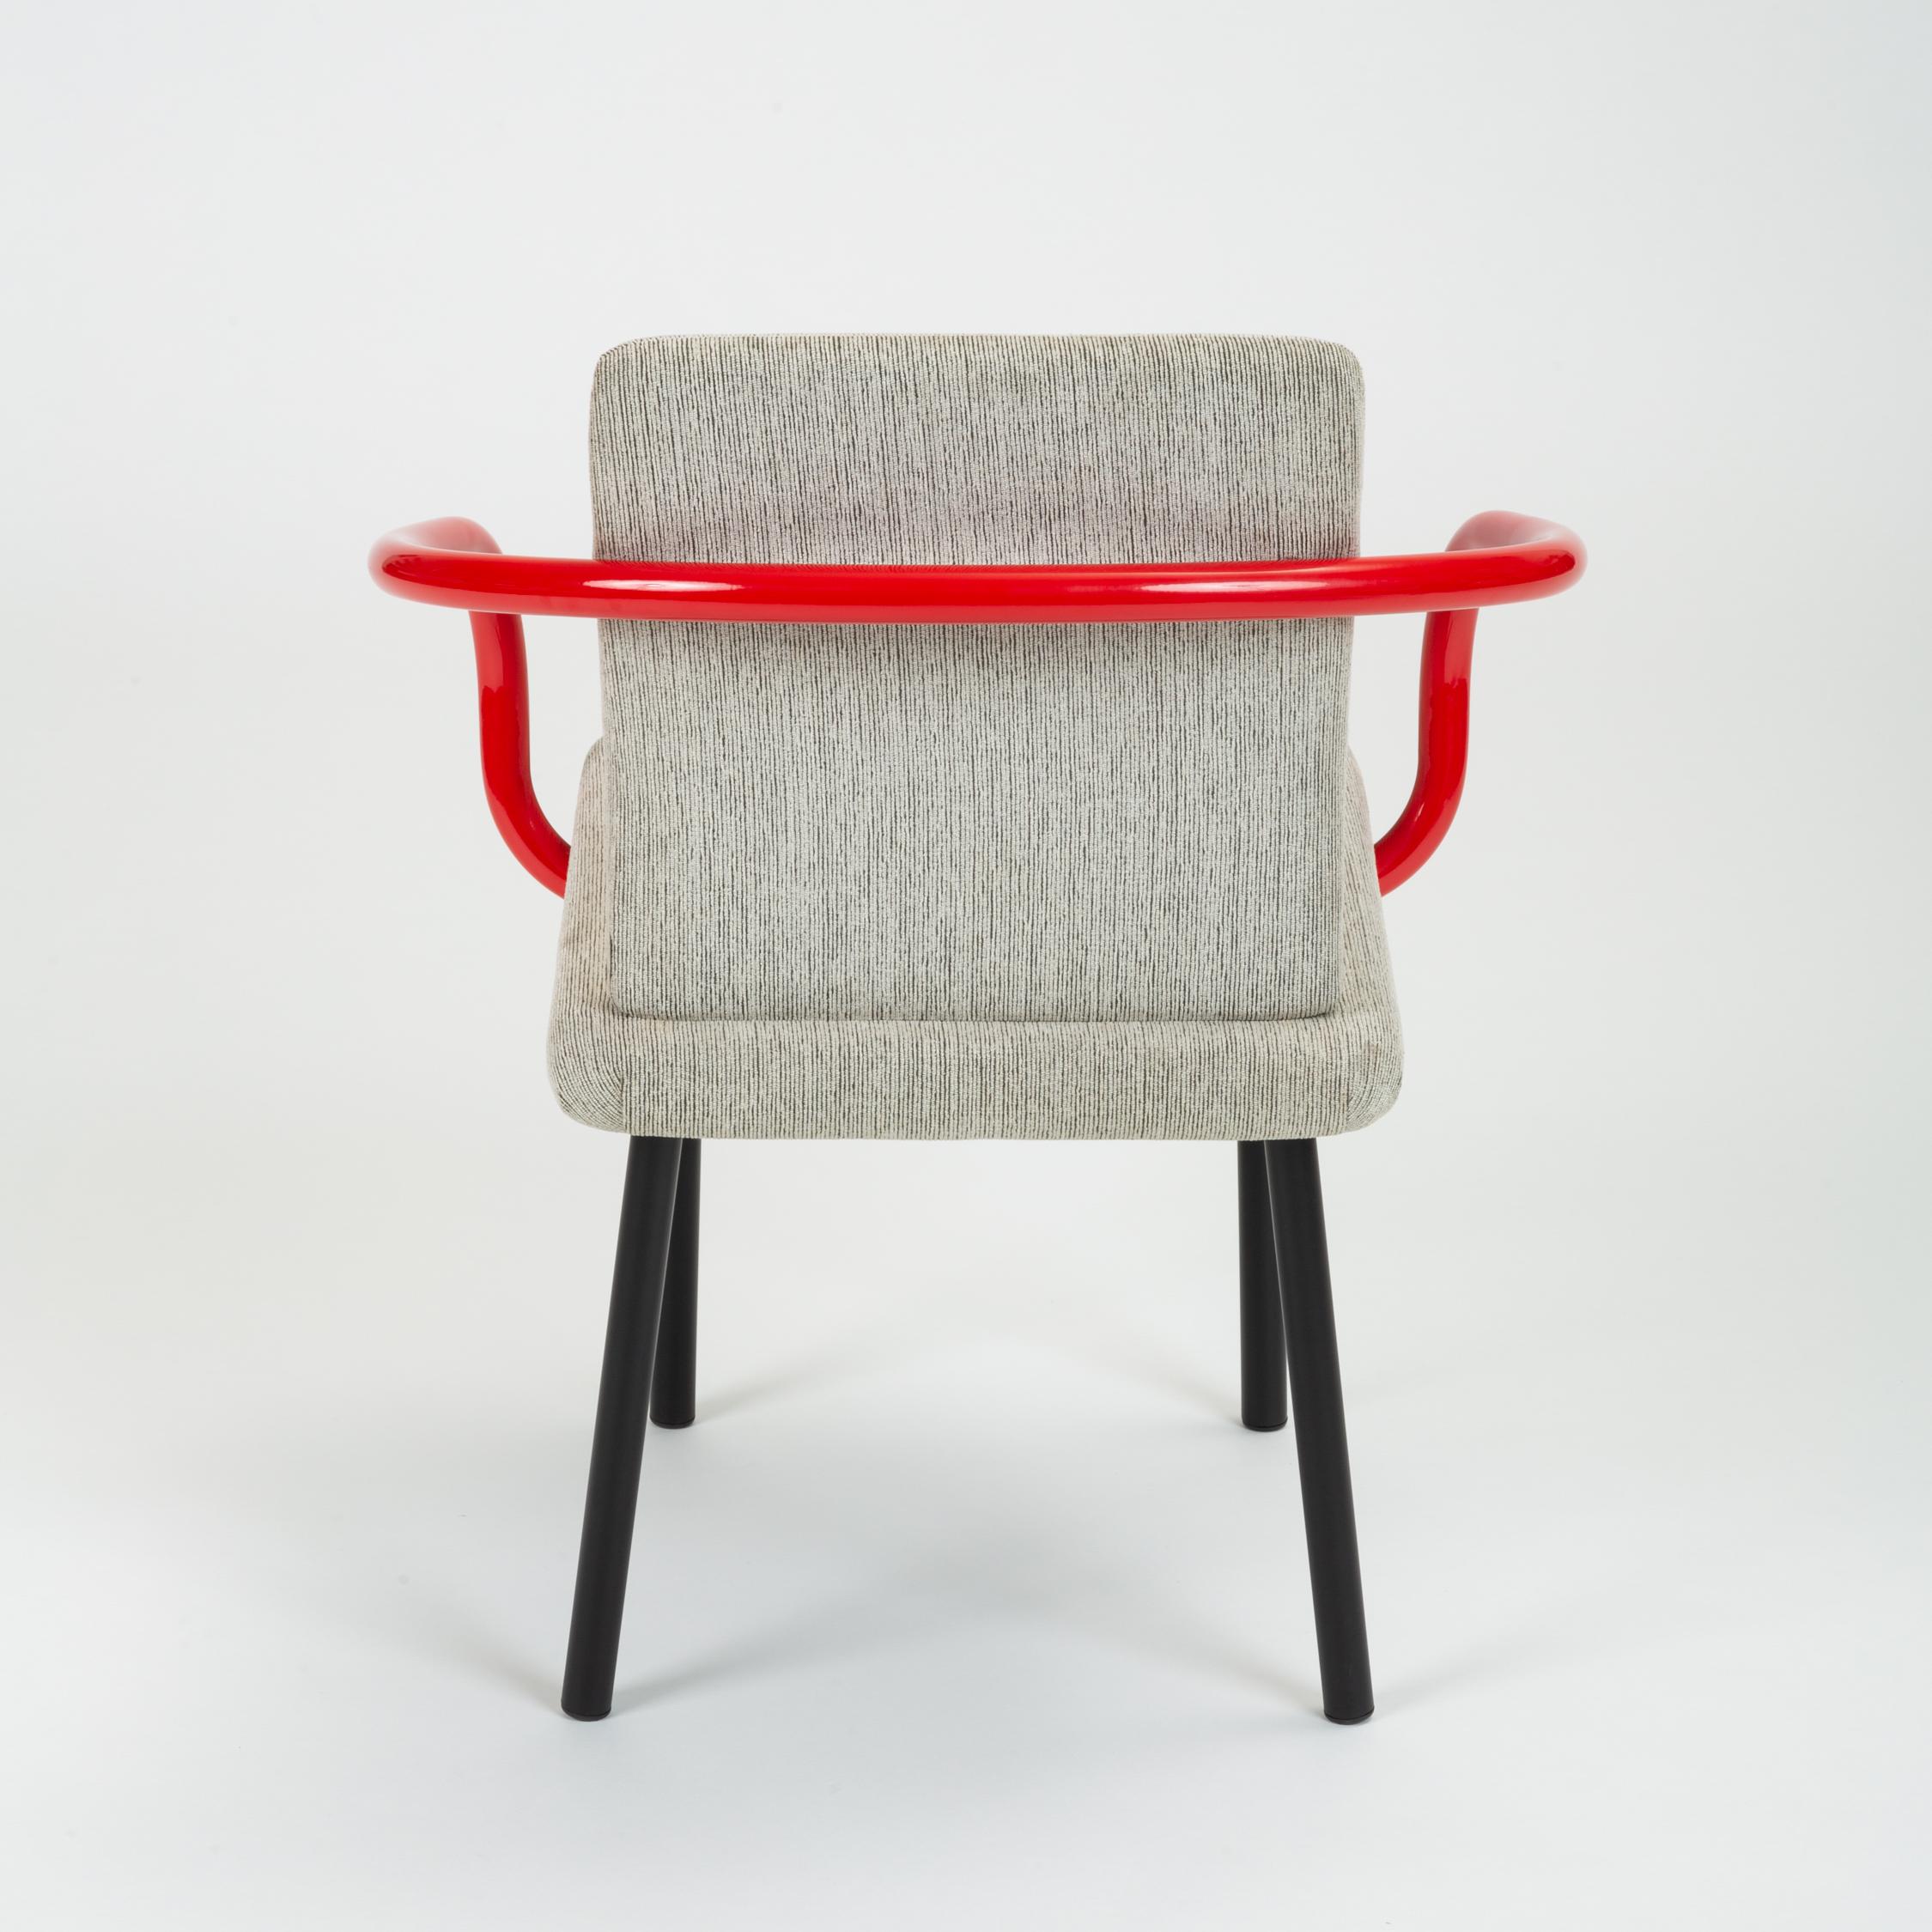 Late 20th Century Set of Four Ettore Sottsass for Knoll Mandarin Chairs with Red Arms